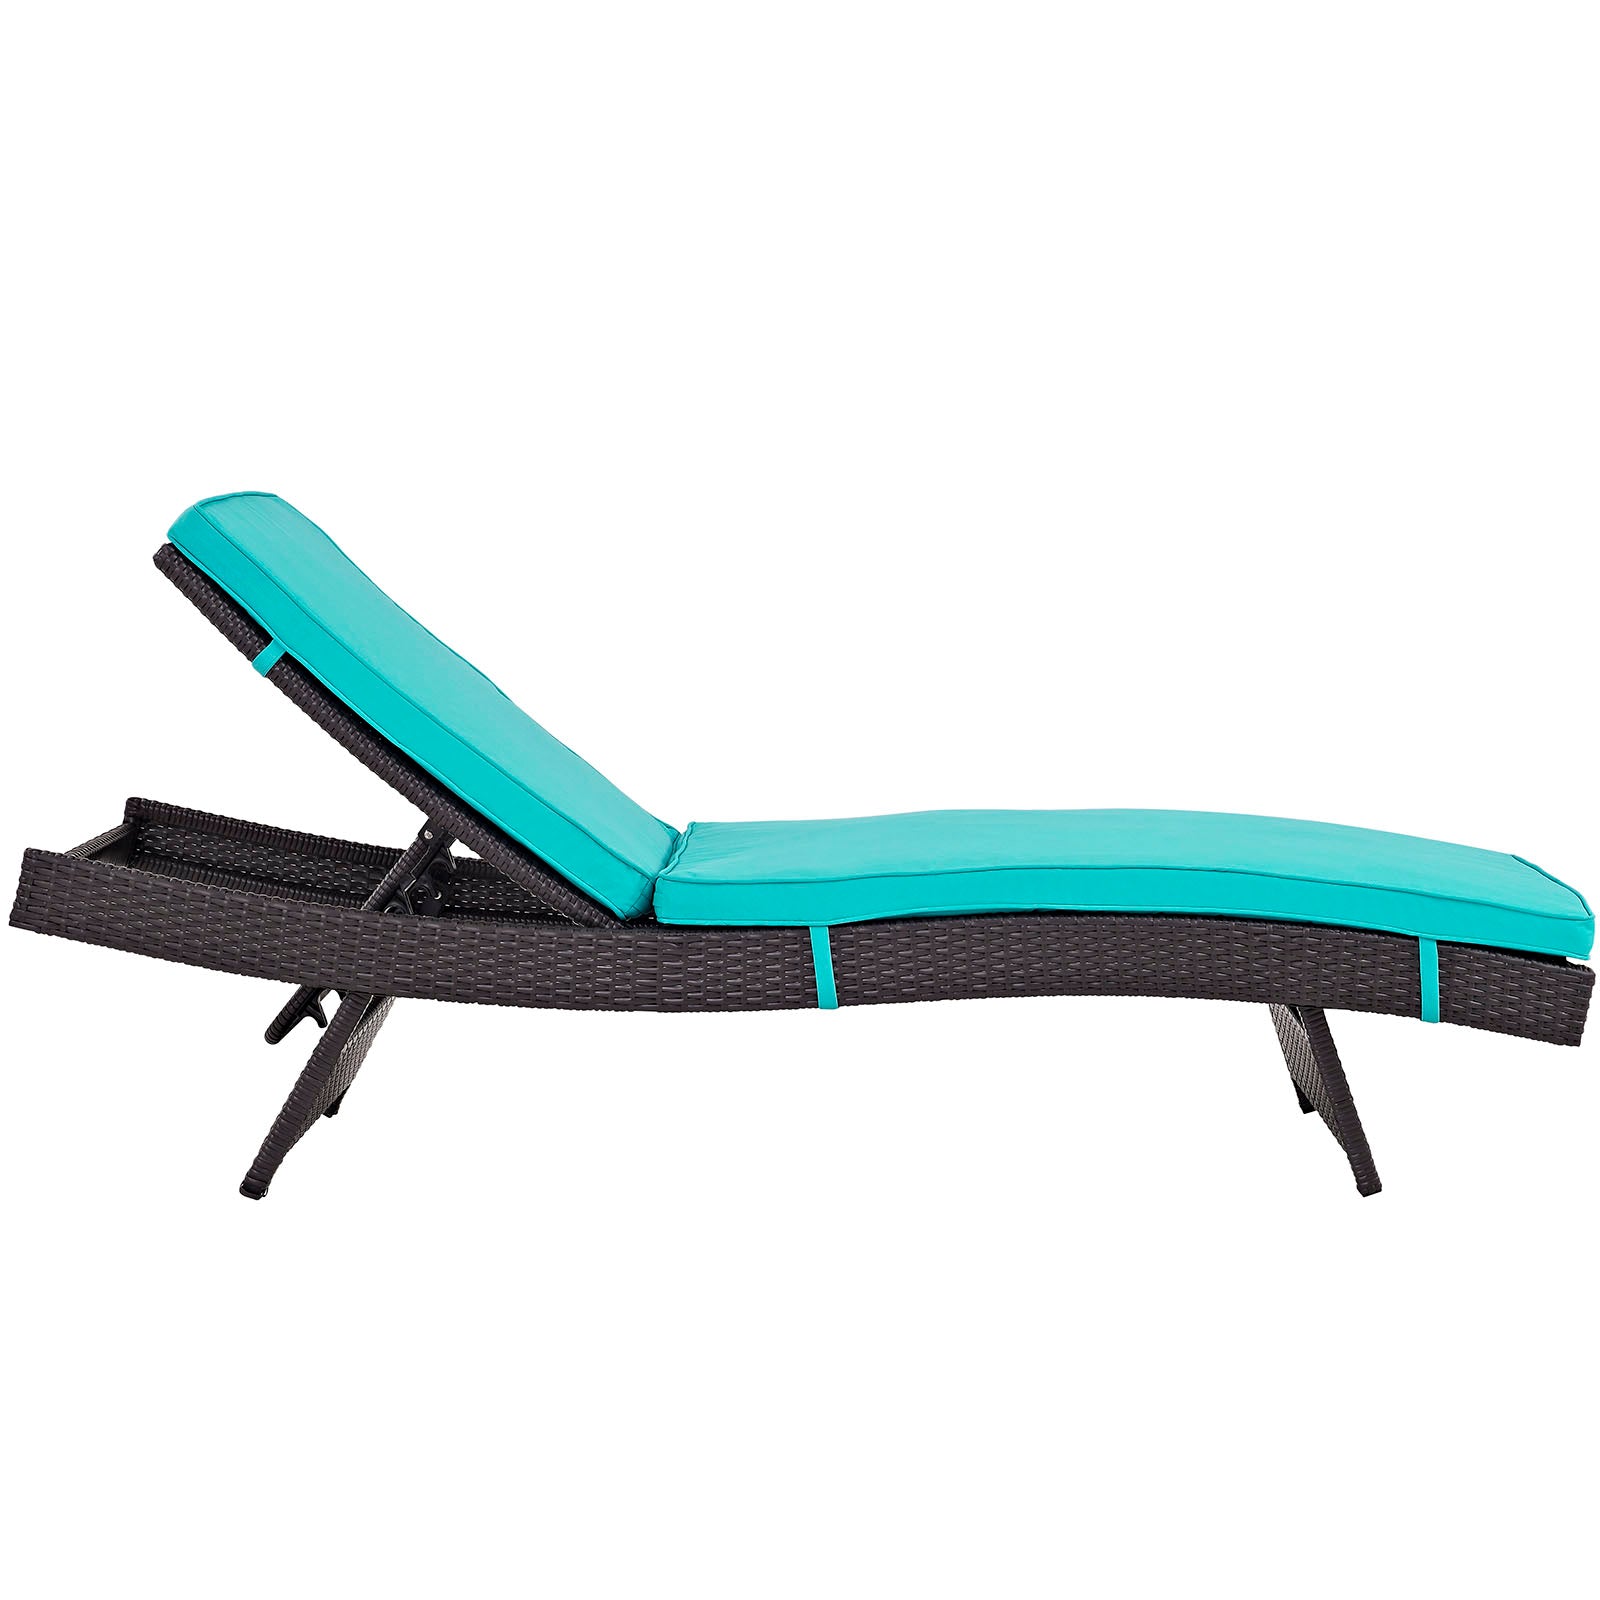 Modway Outdoor Loungers - Convene Chaise Outdoor Patio Set of 2 Espresso Turquoise